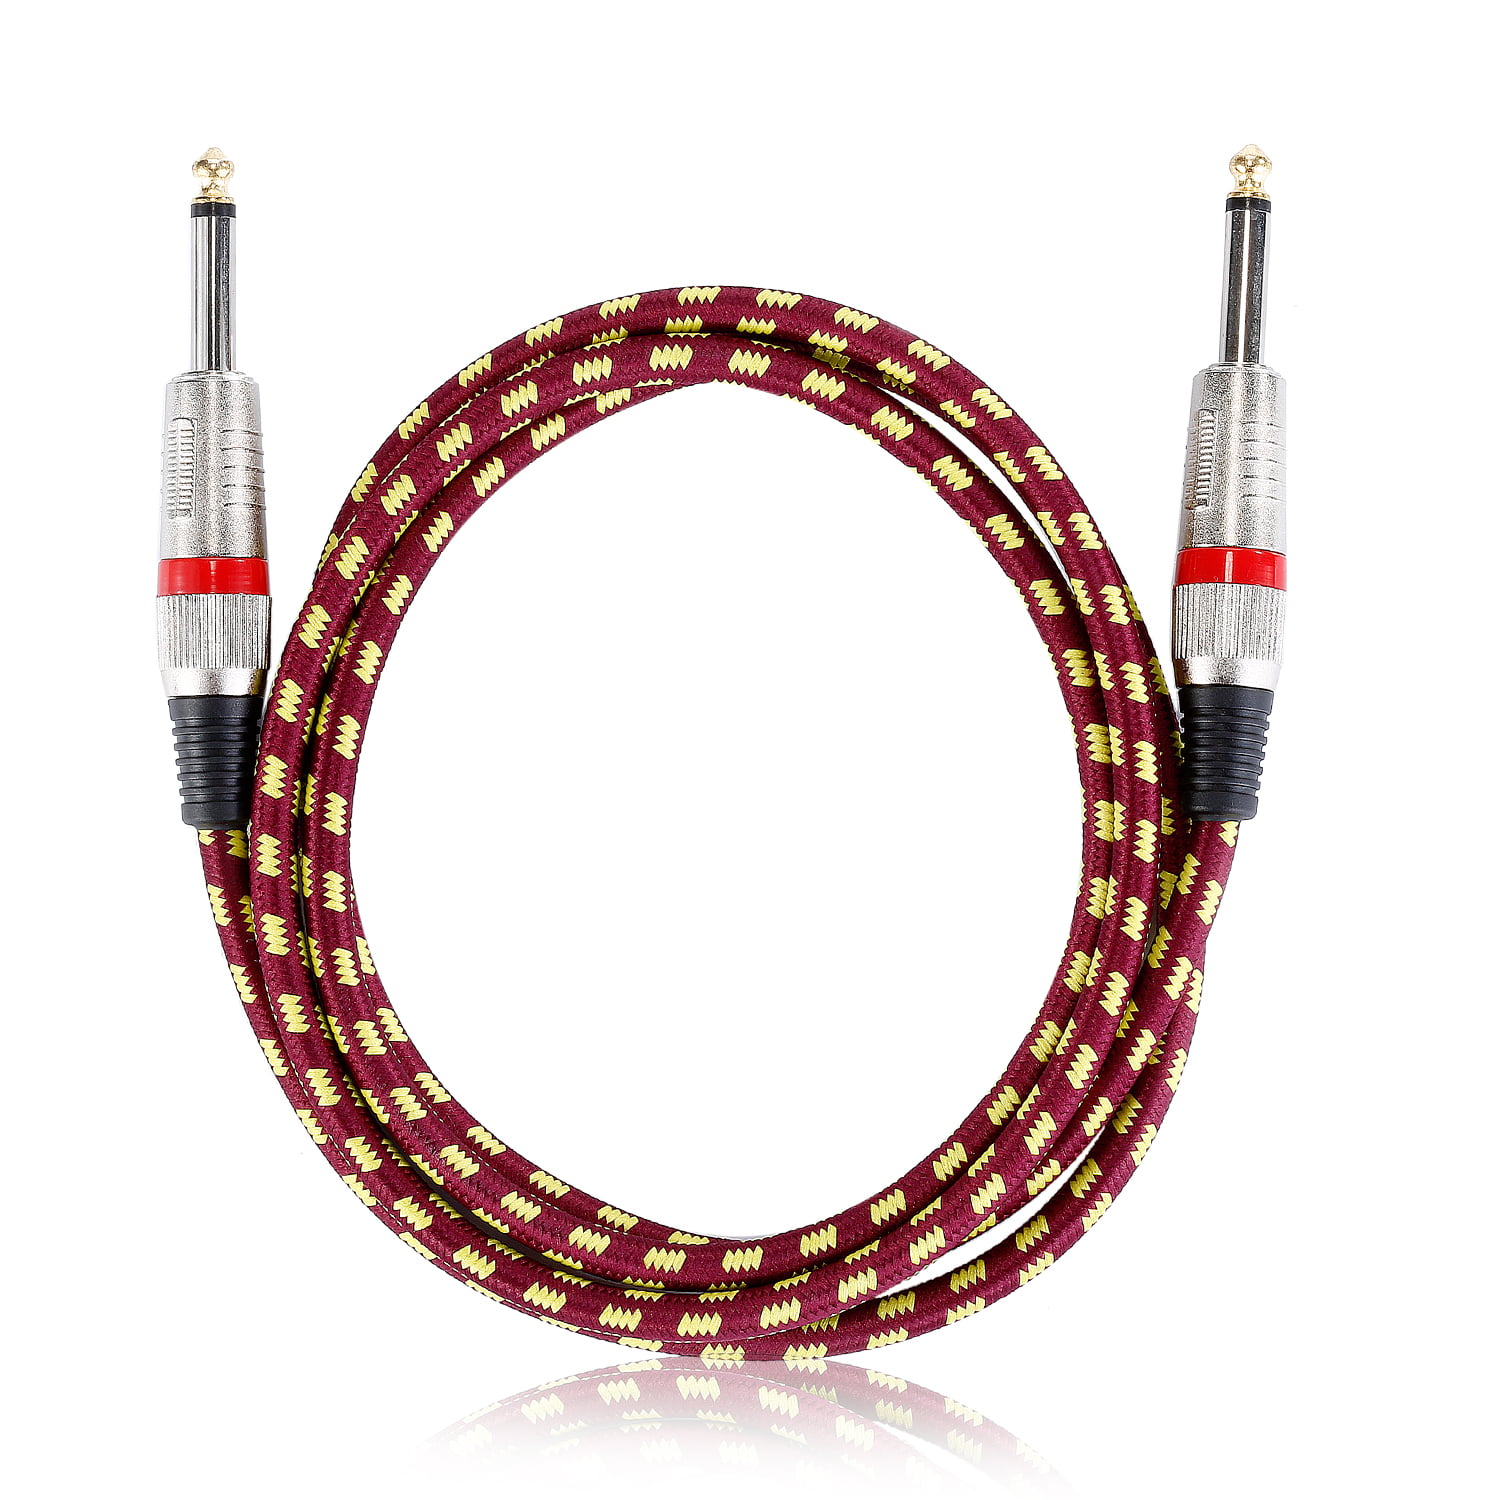 3 Meters Guitar Instrument Cable with Straight 1/4-Inch to Straight 1/4-Inch Red and Yellow Tweed Cloth Jacket Neewer 4 Packs 10 Foot